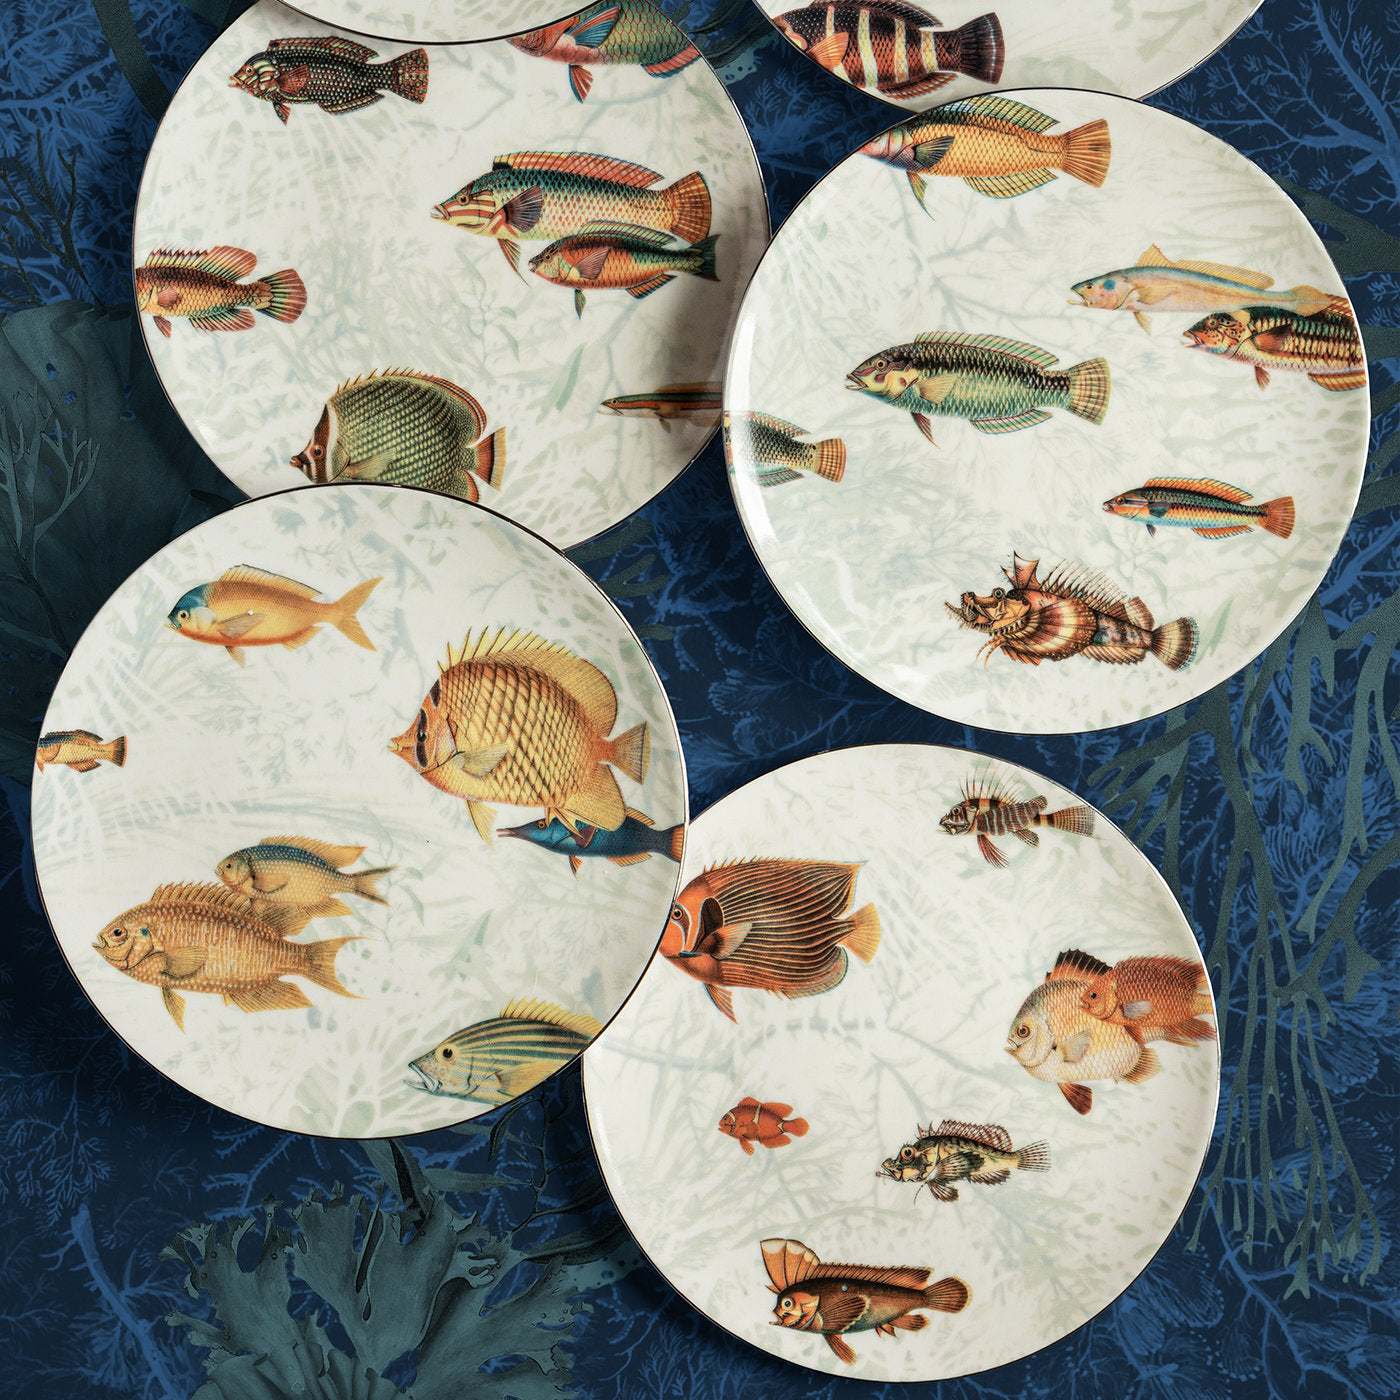 Amami Set Of 2 Porcelain Dessert Plates With Tropical Fish #2 - Alternative view 2